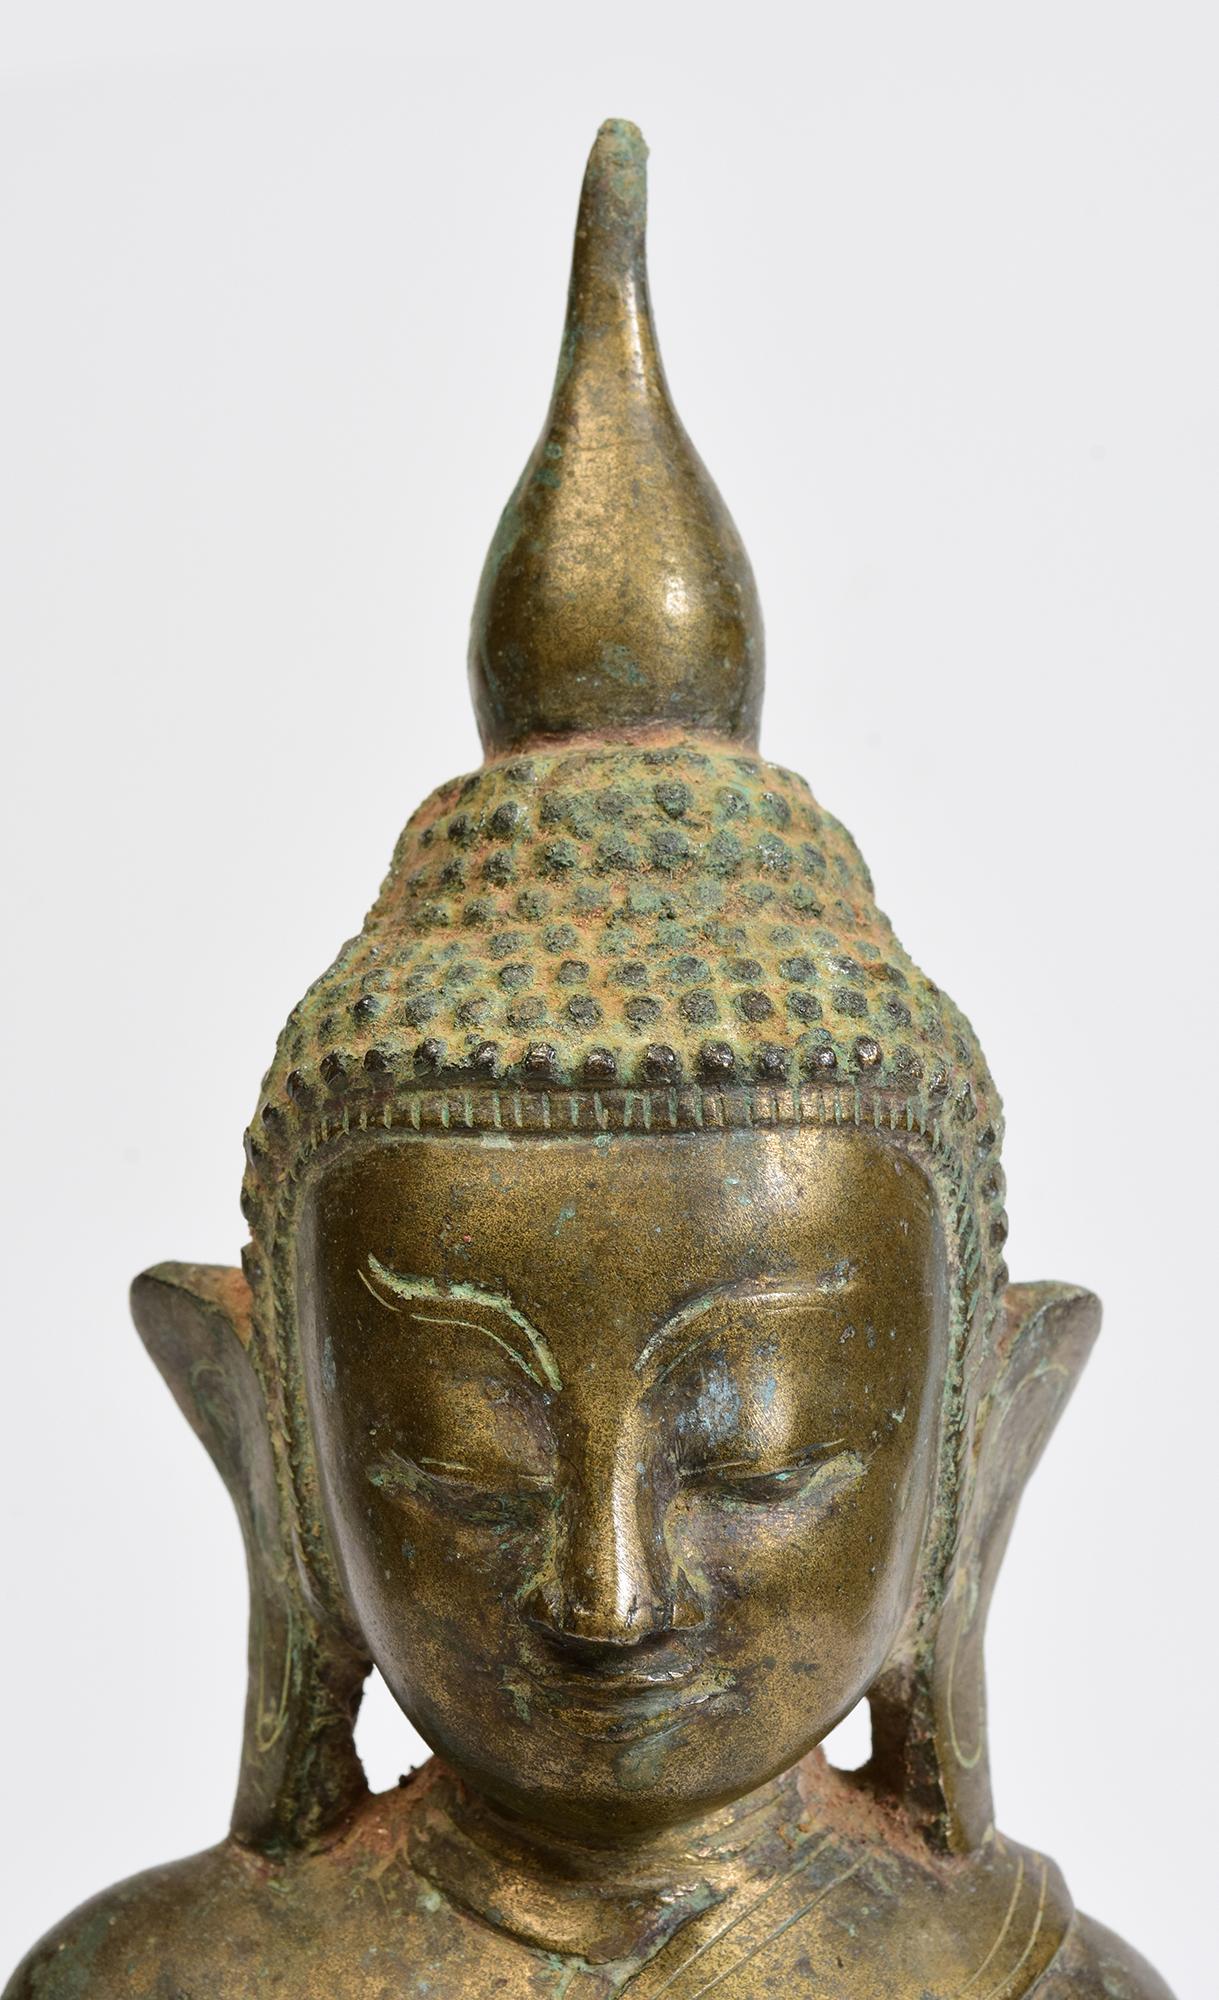 Antique Burmese bronze Buddha sitting in Mara Vijaya (calling the earth to witness) posture on a base.

Age: Burma, Early Shan Period, 17th Century
Size: Height 39 C.M. / Width 18.9 C.M. / Depth 10.3 C.M.
Condition: Nice condition overall (some